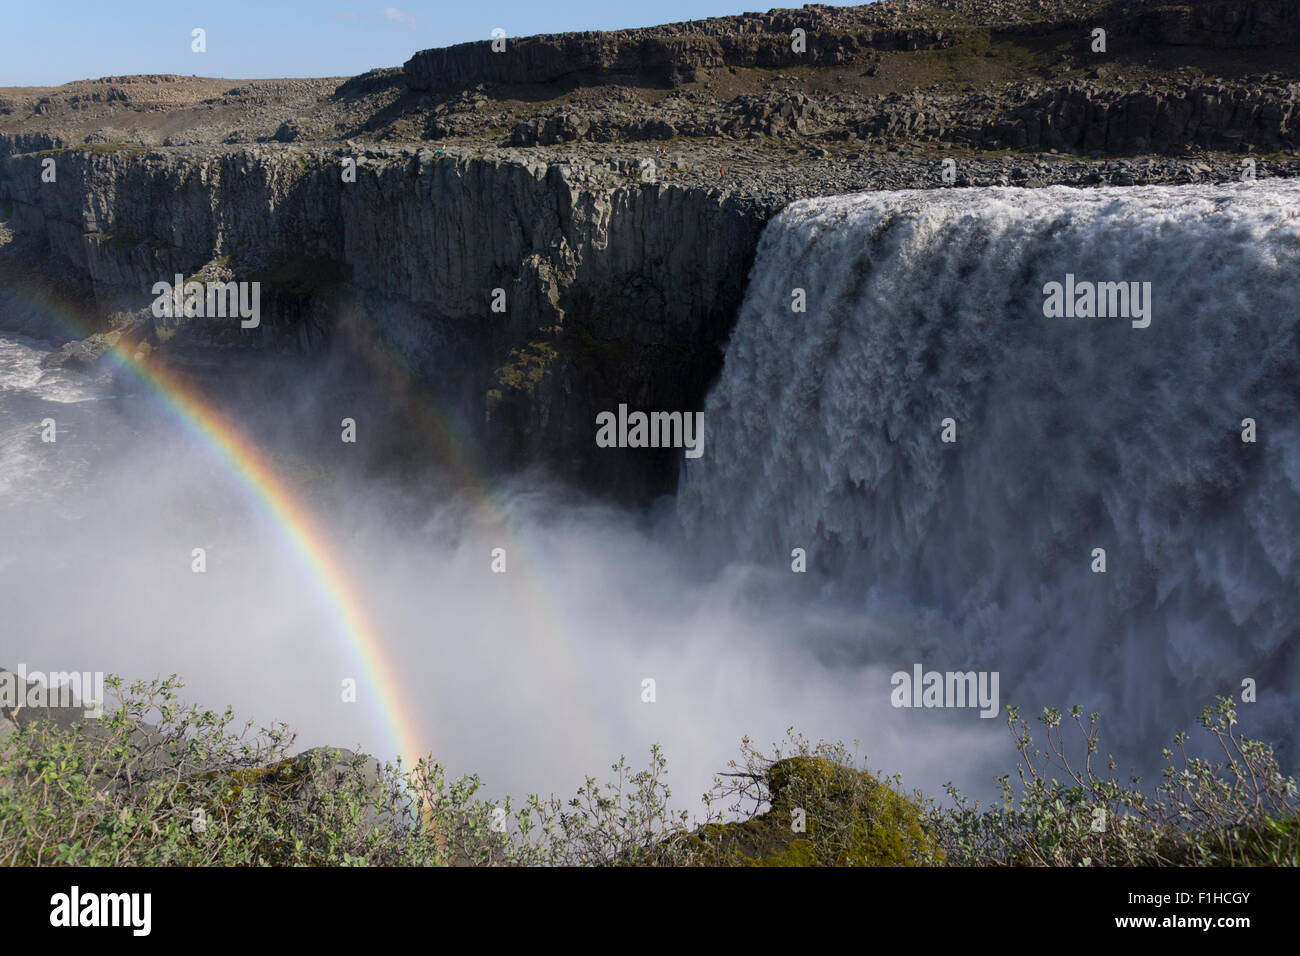 A double rainbow at Dettifoss, said to be Europe's most powerful waterfall, with a 45m drop. Vatnajökull National Park, Iceland Stock Photo